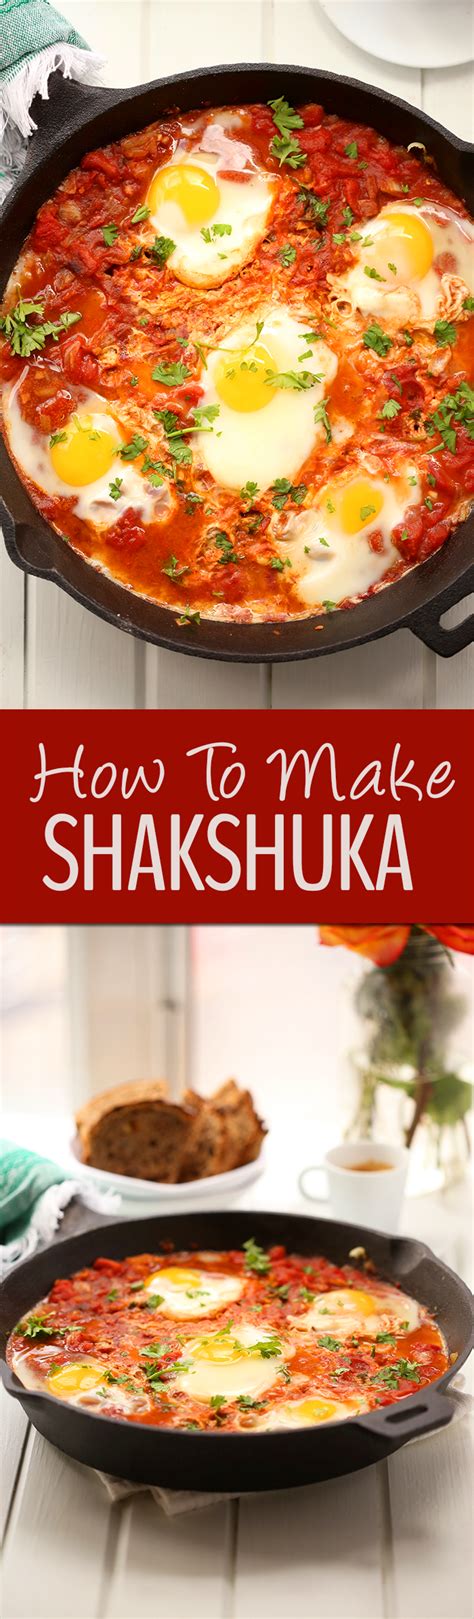 Find your favorite middle eastern recipes for hummus, falafel, tabbouleh, kebabs, phyllo pastries, and more. Have you ever wondered how to make shakshuka? This wonderful Middle Eastern poached egg dish ...